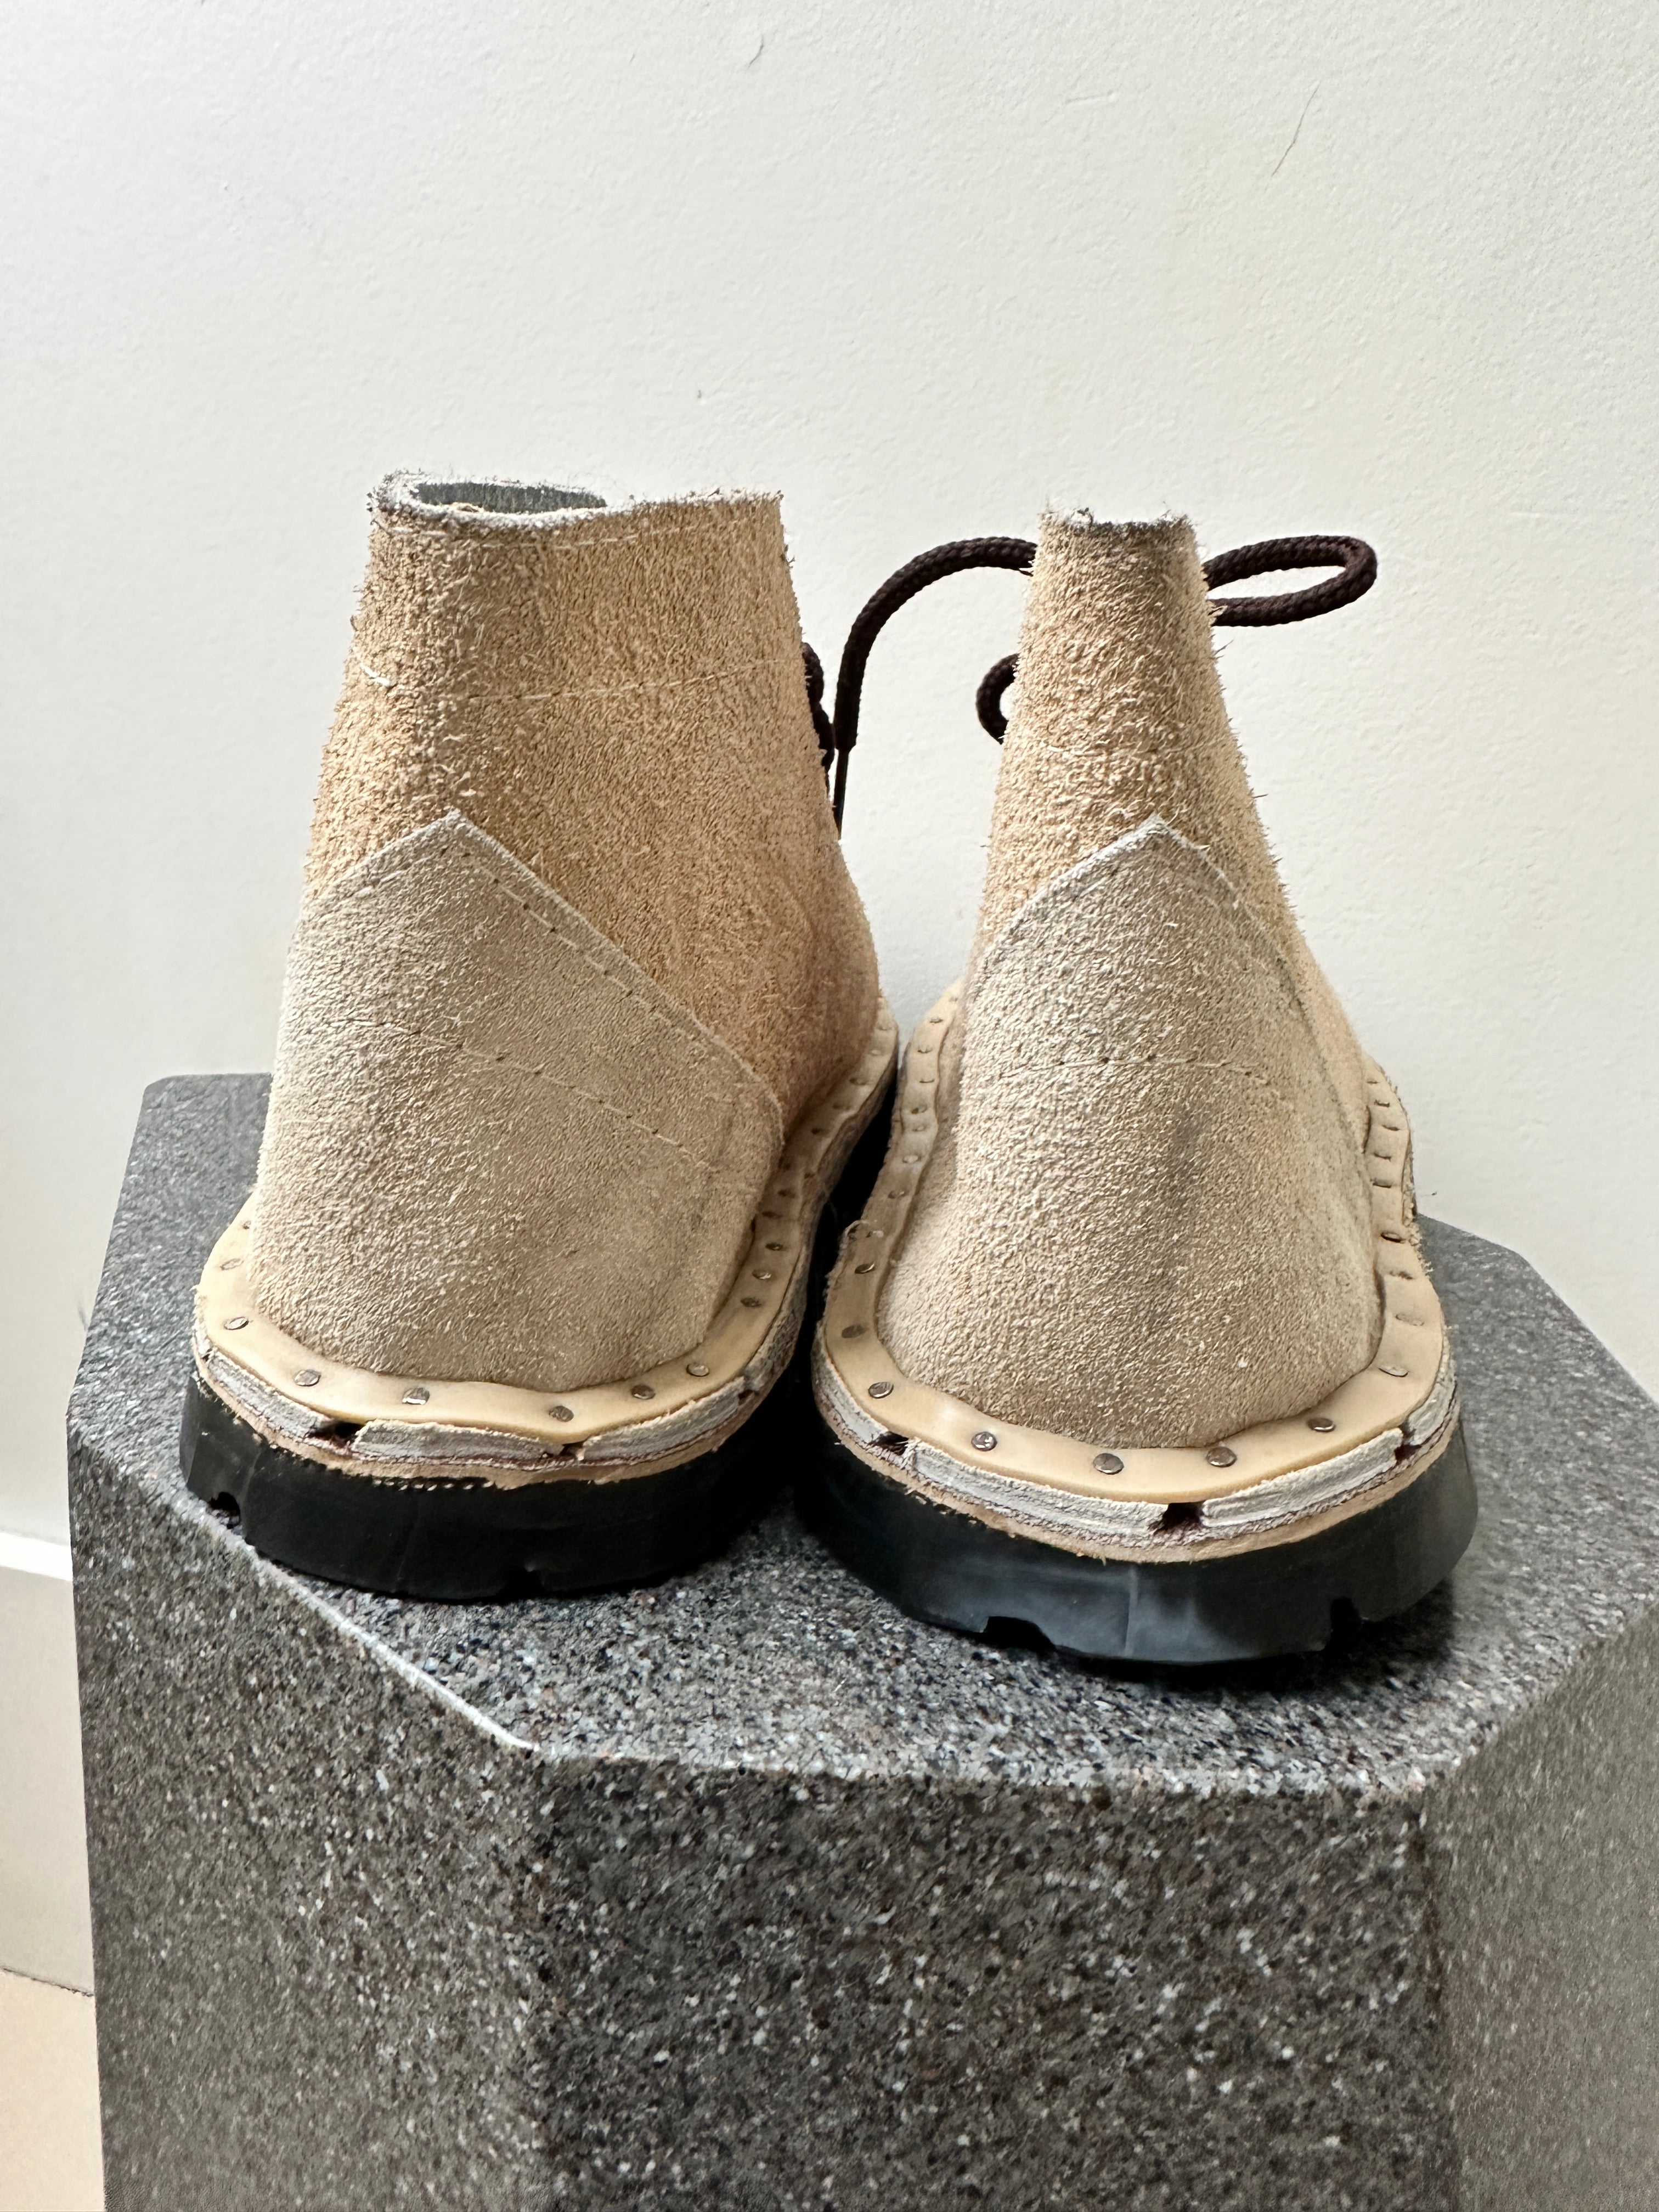 Future Nomads Shoes Handmade Boots With Tyre Sole